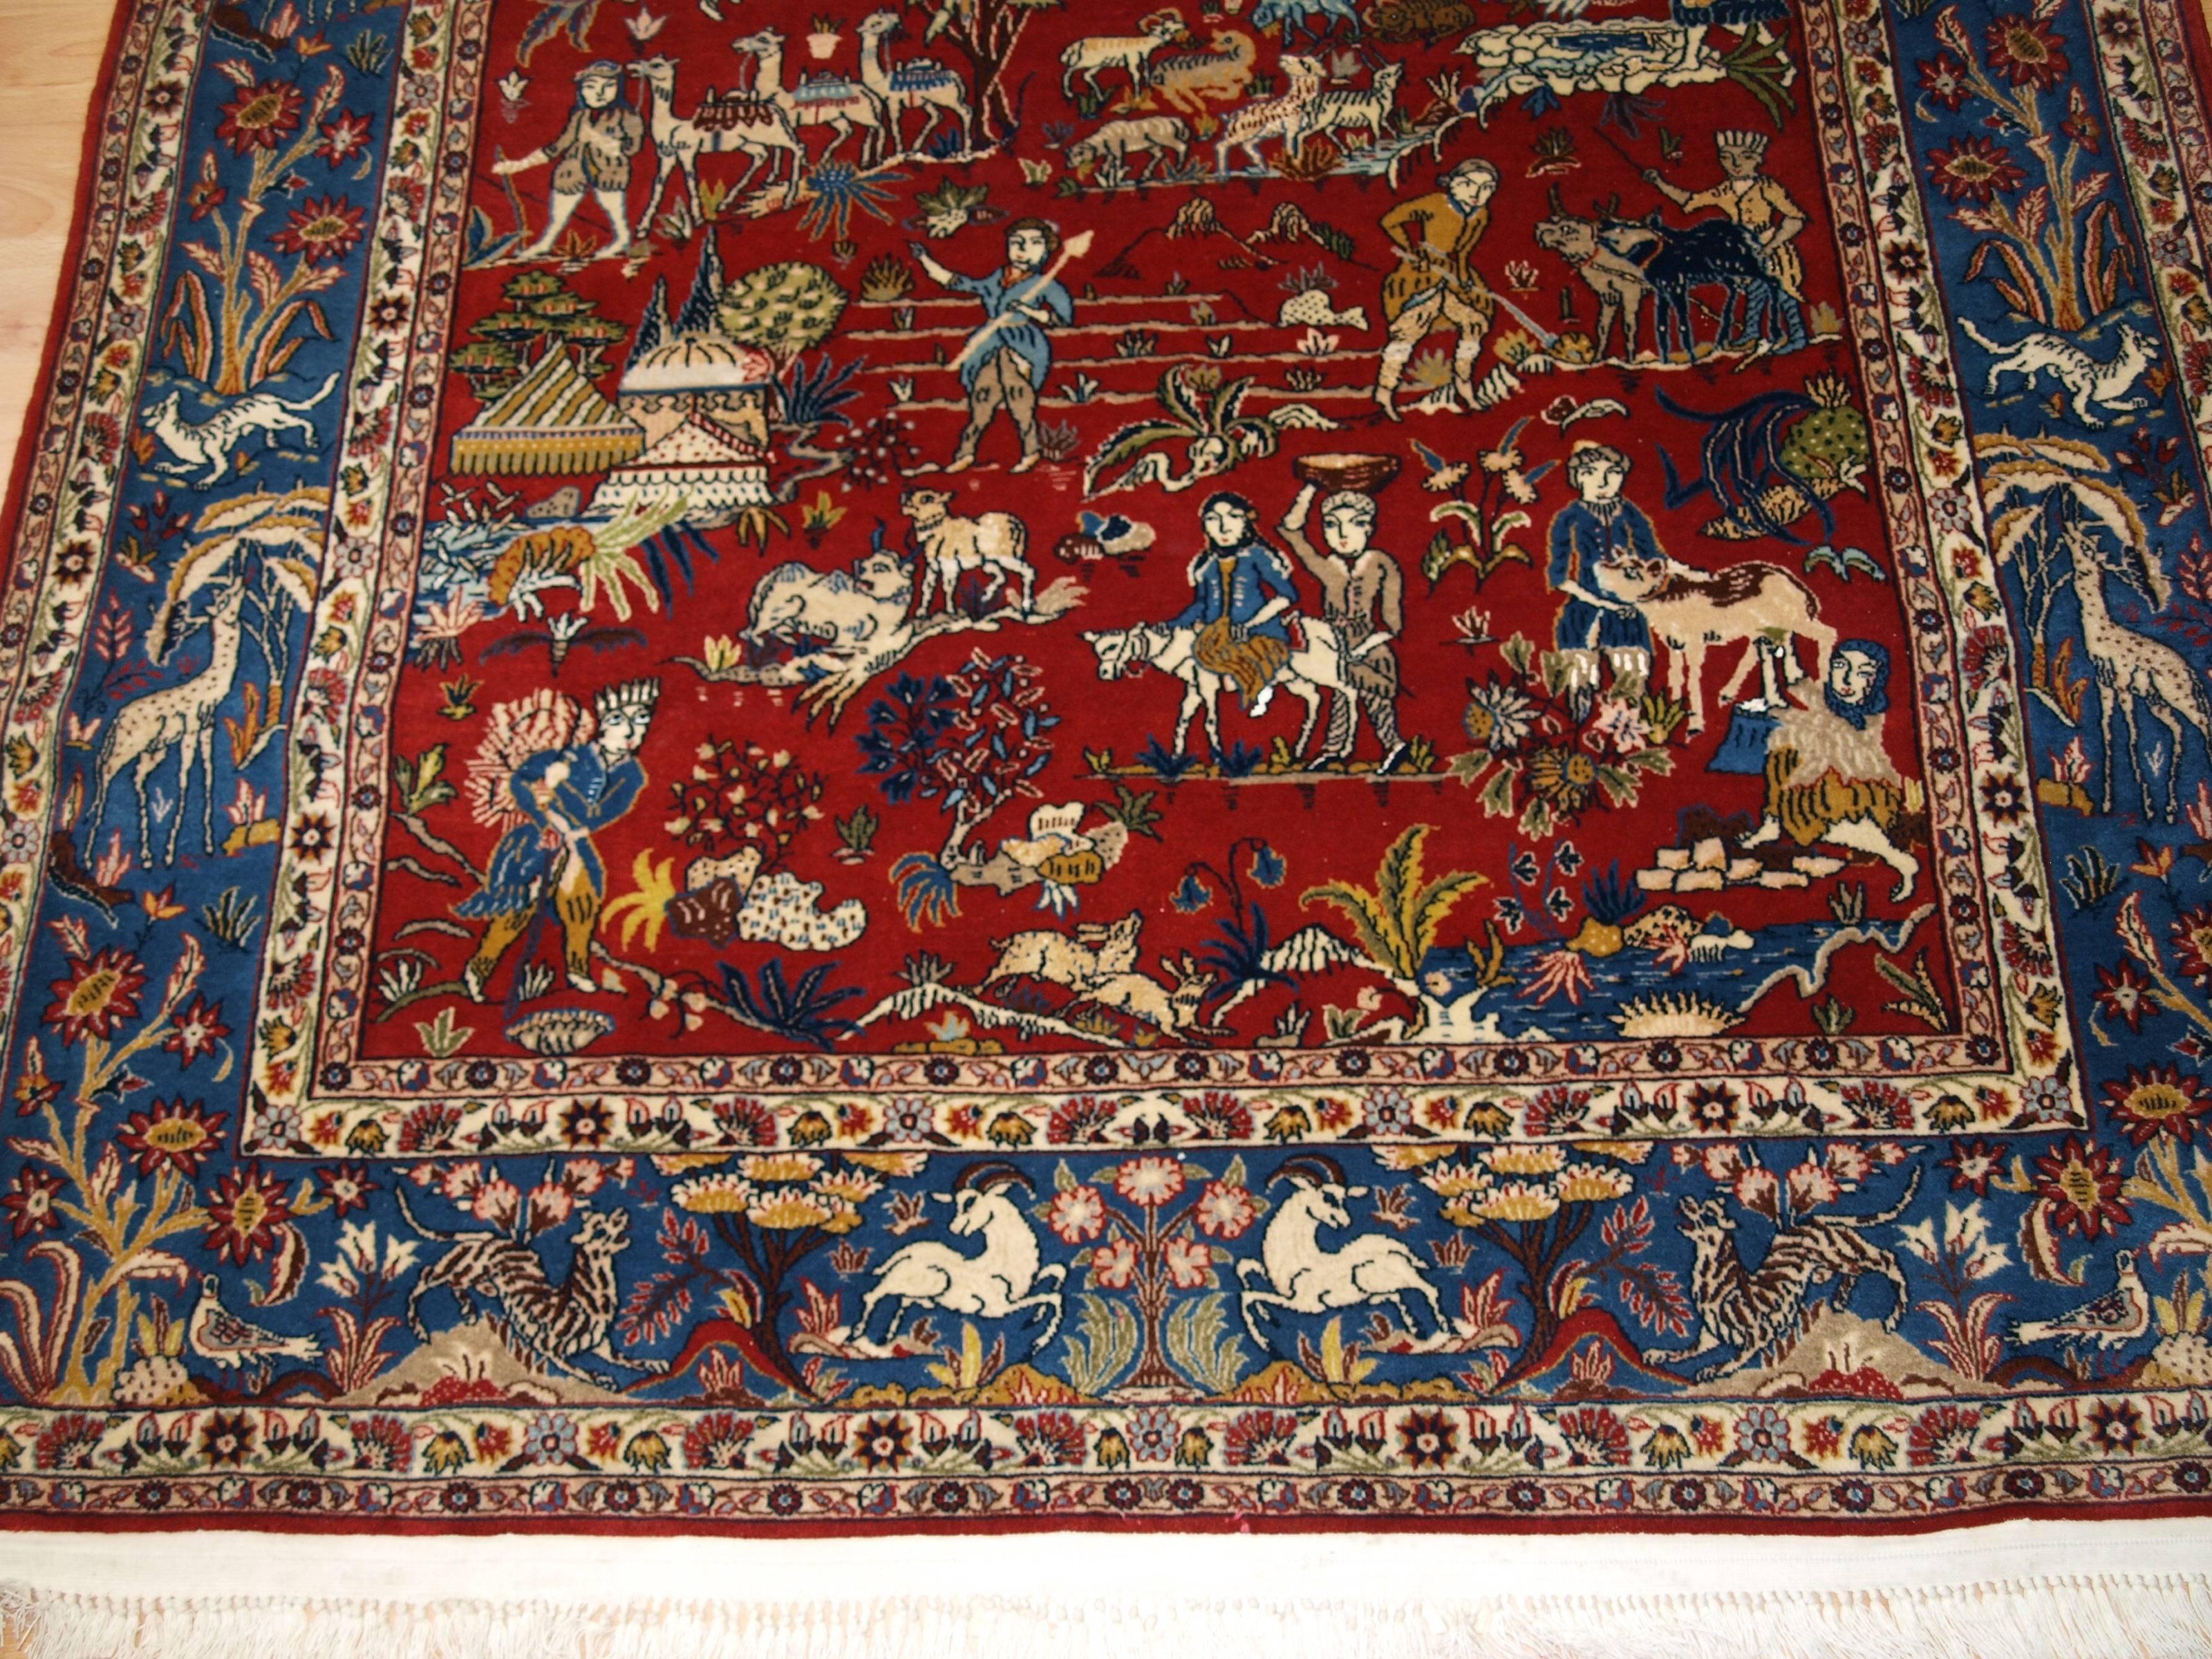 Mid-20th Century Old Persian Qum Pictorial Rug with Wool Pile and Silk Highlights